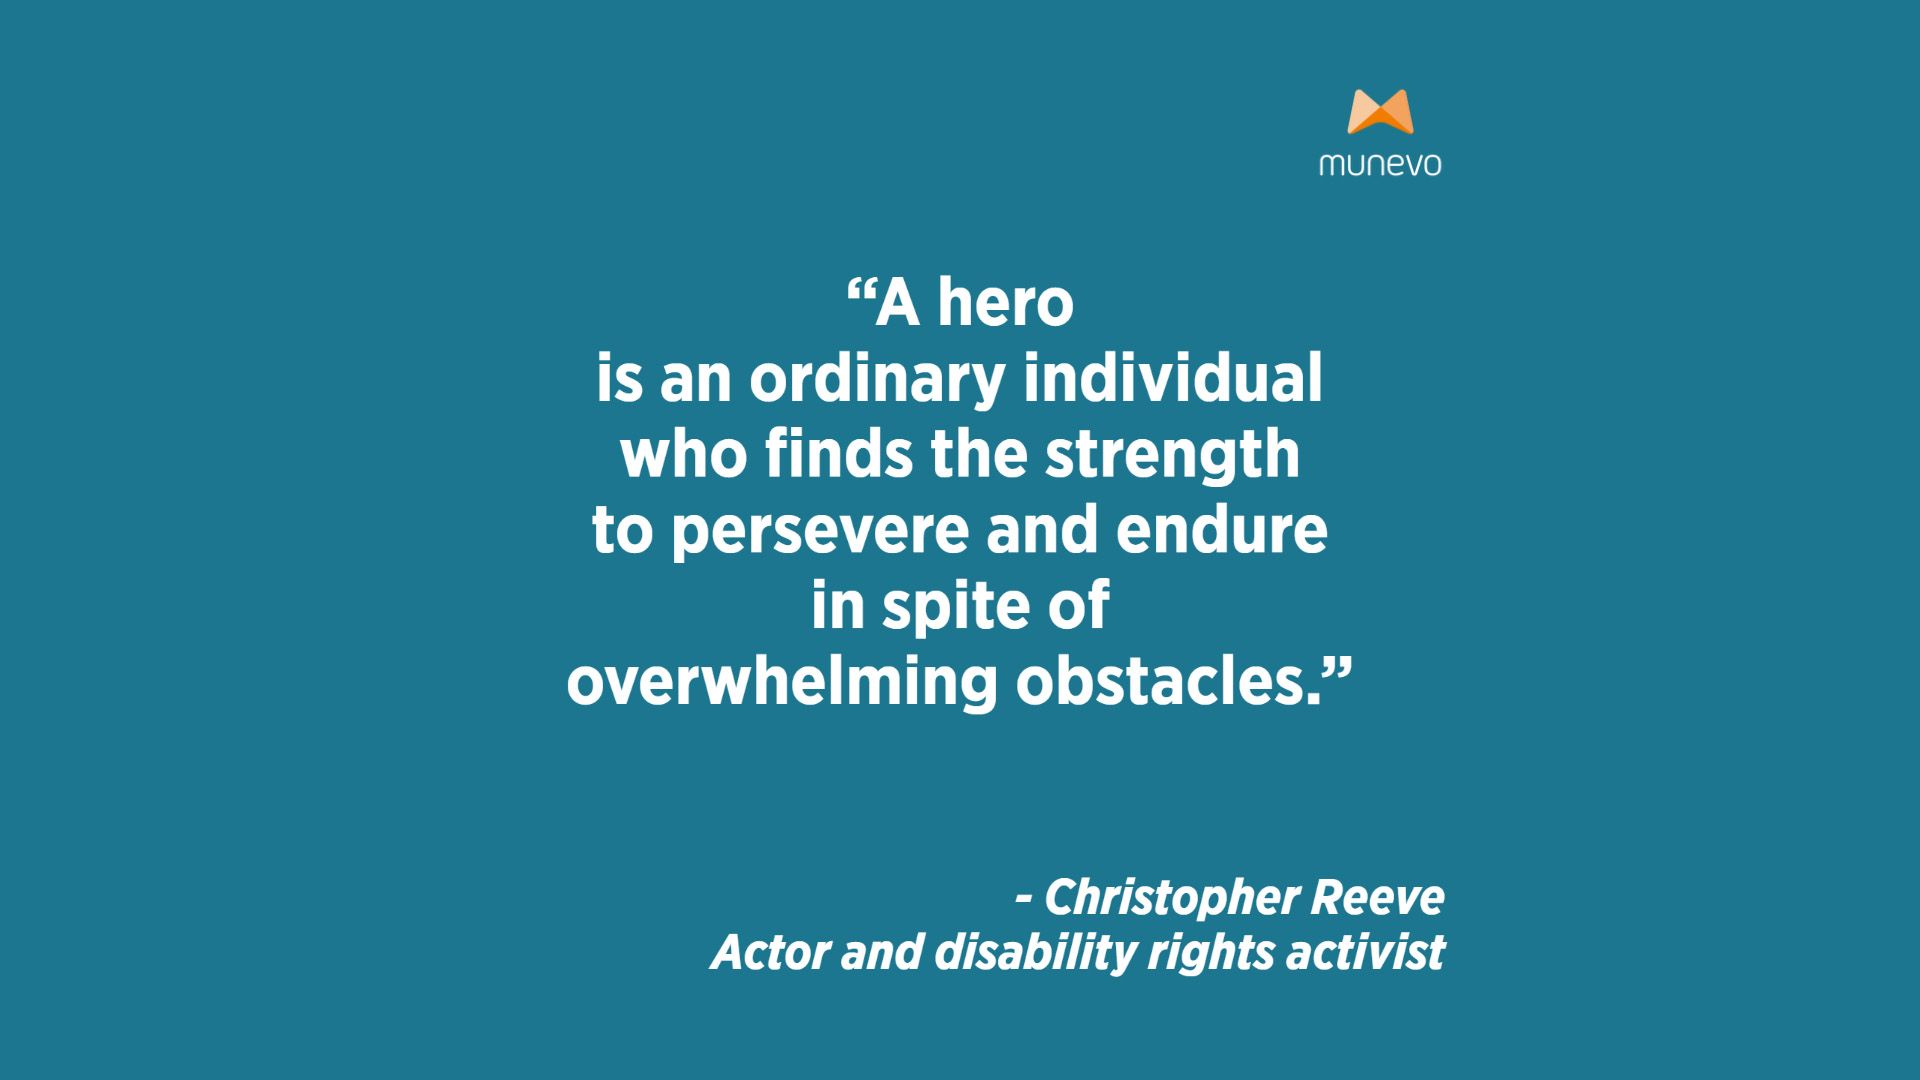 "A hero is an ordinary individual who finds the strength to persevere and endure in spite of overwhelming obstacles." - Christopher Reeve, Actor and disability rights activist